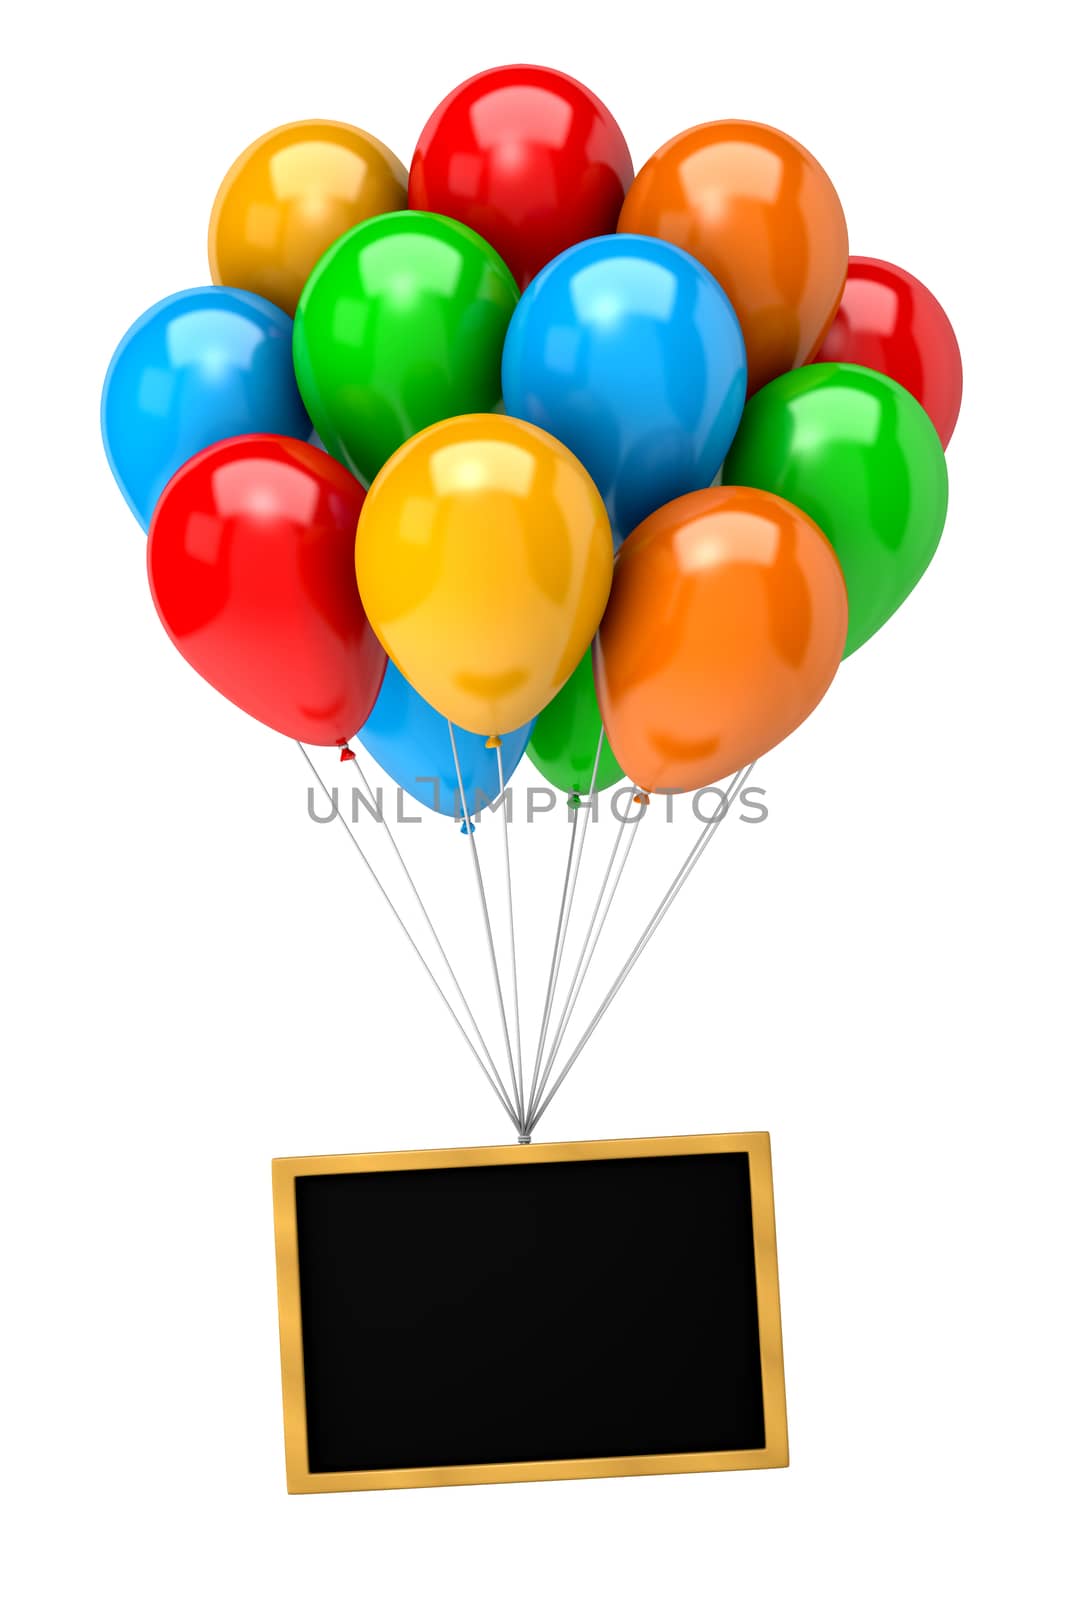 Bunch of Vibrant Color Balloons Holding Up a Blank Chalkboard on White Background 3D Illustration